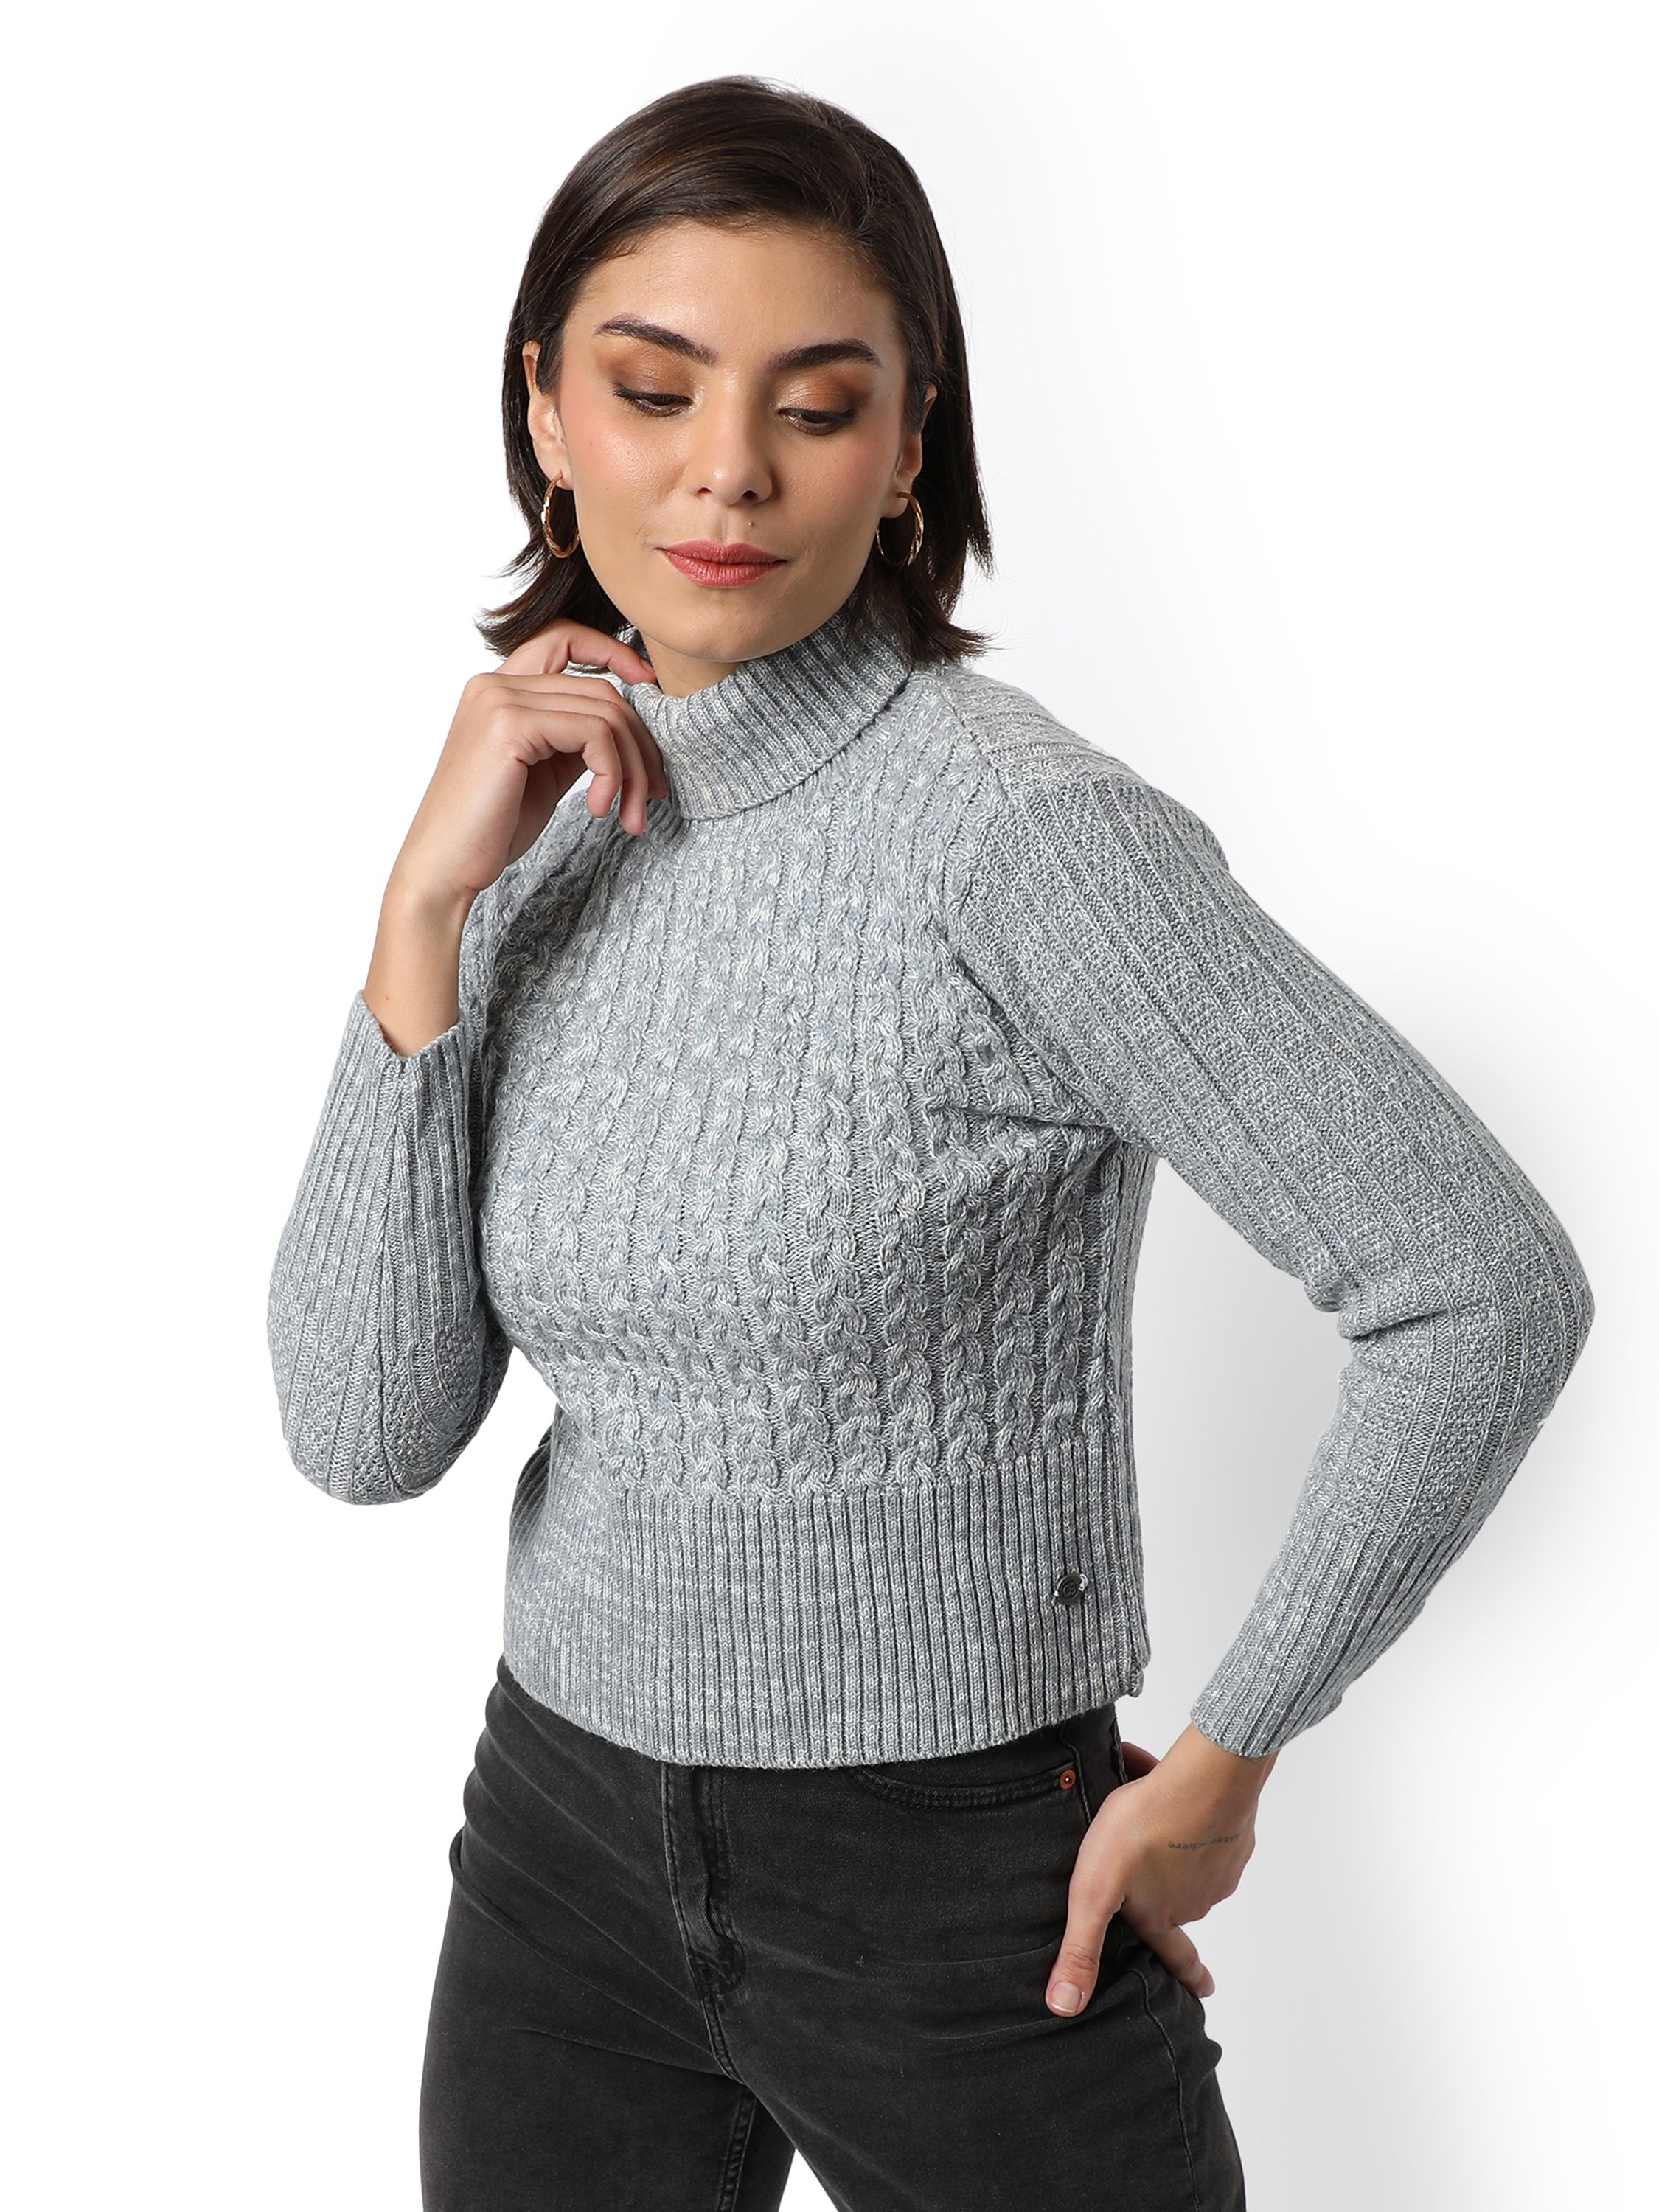 Women's Grey Cable Knit Regular Fit Sweater For Winter Wear